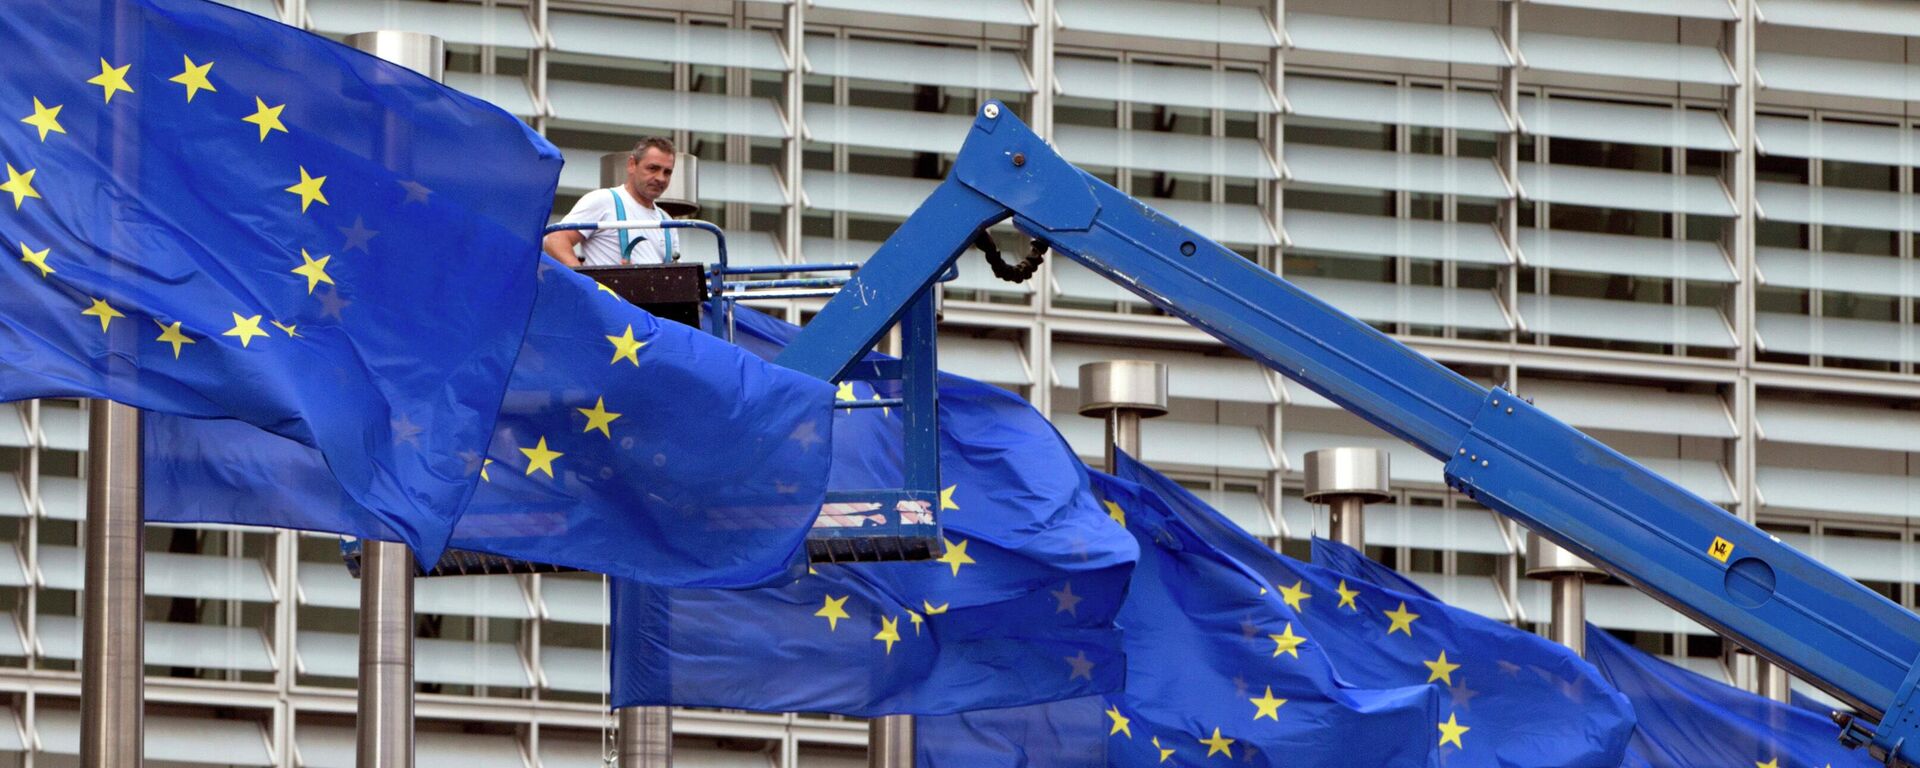 FILE- In this June 23, 2016 file photo, a worker on a lift adjusts the EU flags in front of EU headquarters in Brussels - Sputnik International, 1920, 30.08.2022